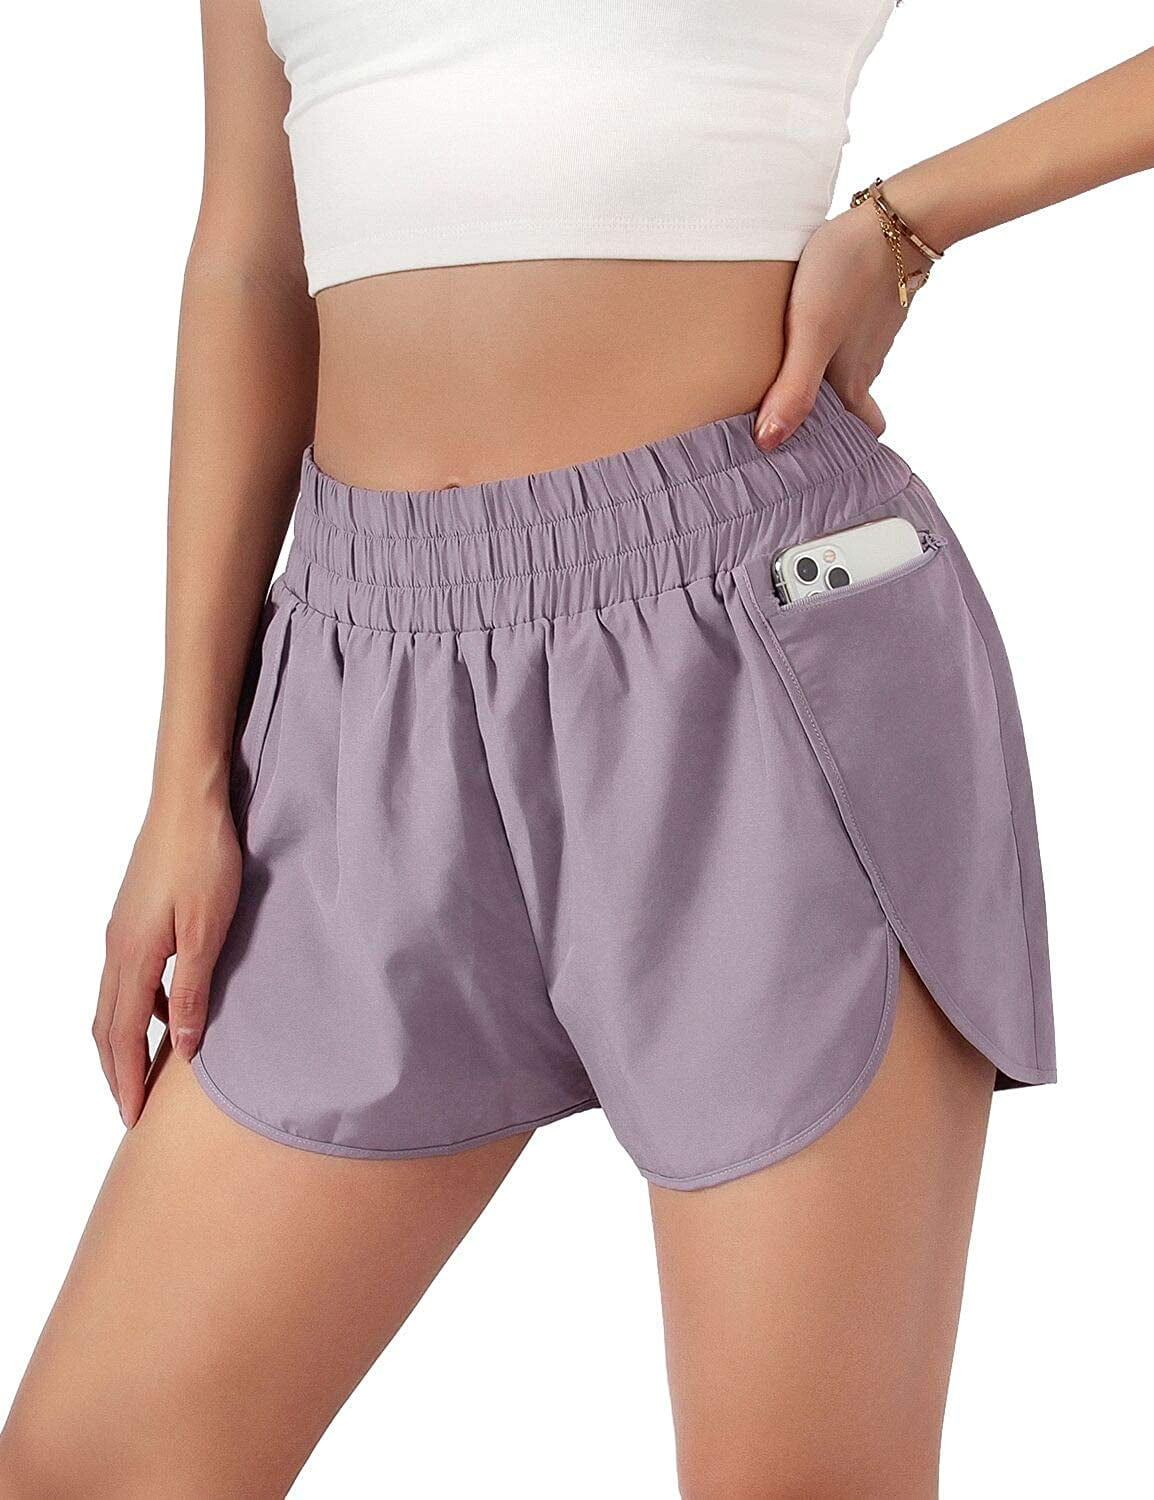 Made by Emma Womens Casual Elastic Waistband Workout Running Athletic Active Shorts